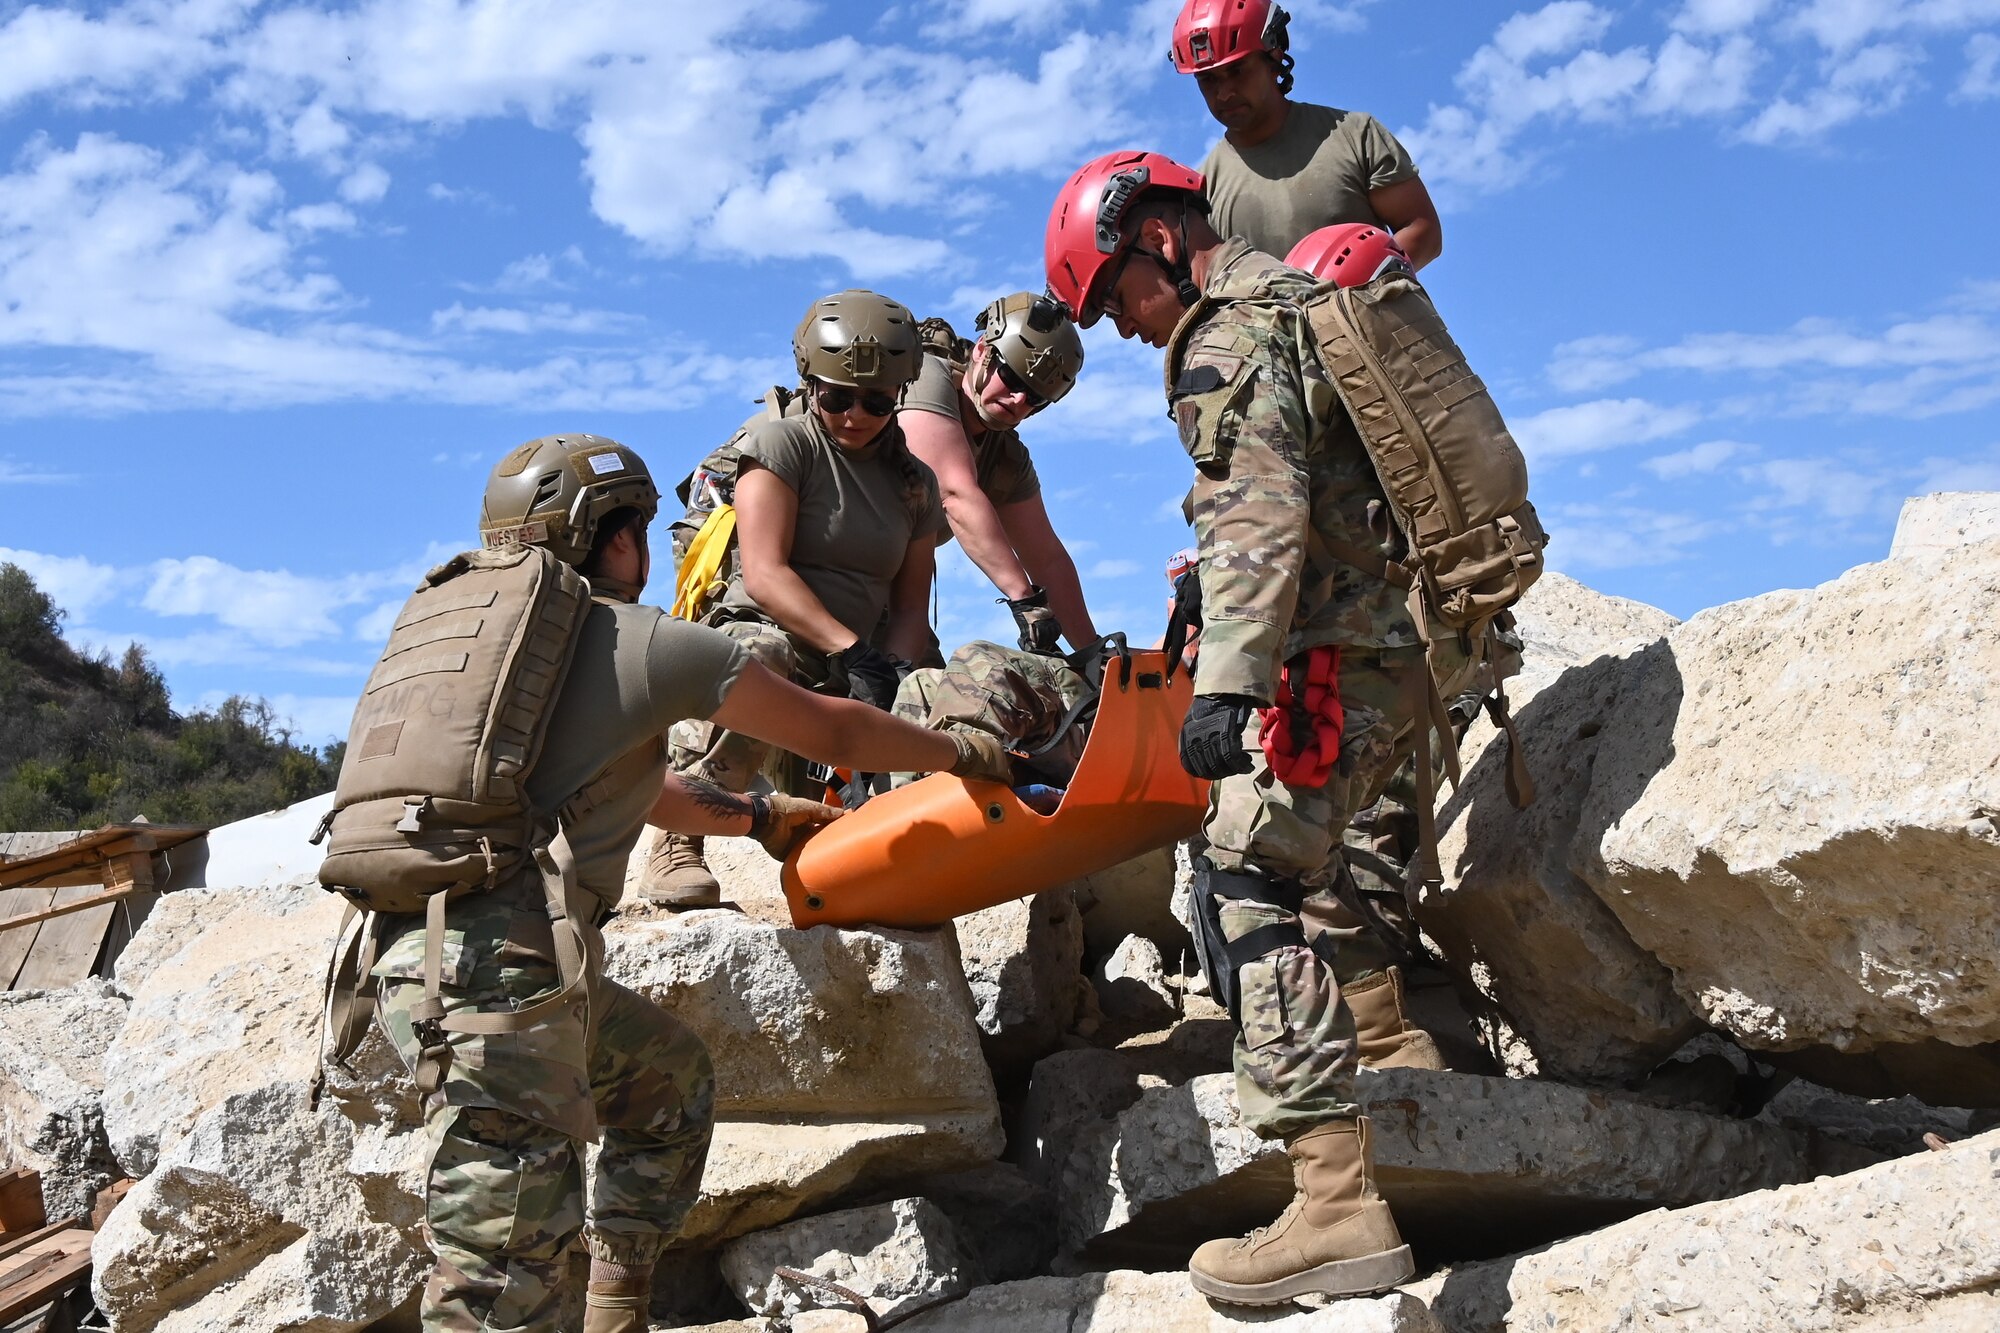 Members from the 118th Medical Group (MDG), Tennessee Air National Guard, carry a stretcher during a search and rescue exercise Sept. 12, 2021 in Ventura, California. 118th MDG members traveled to California to simulate an earthquake scenario, and get training on their new En-Route Patient Stating System capabilities. (U.S. Air National Guard photo by Master Sgt. Jeremy Cornelius)